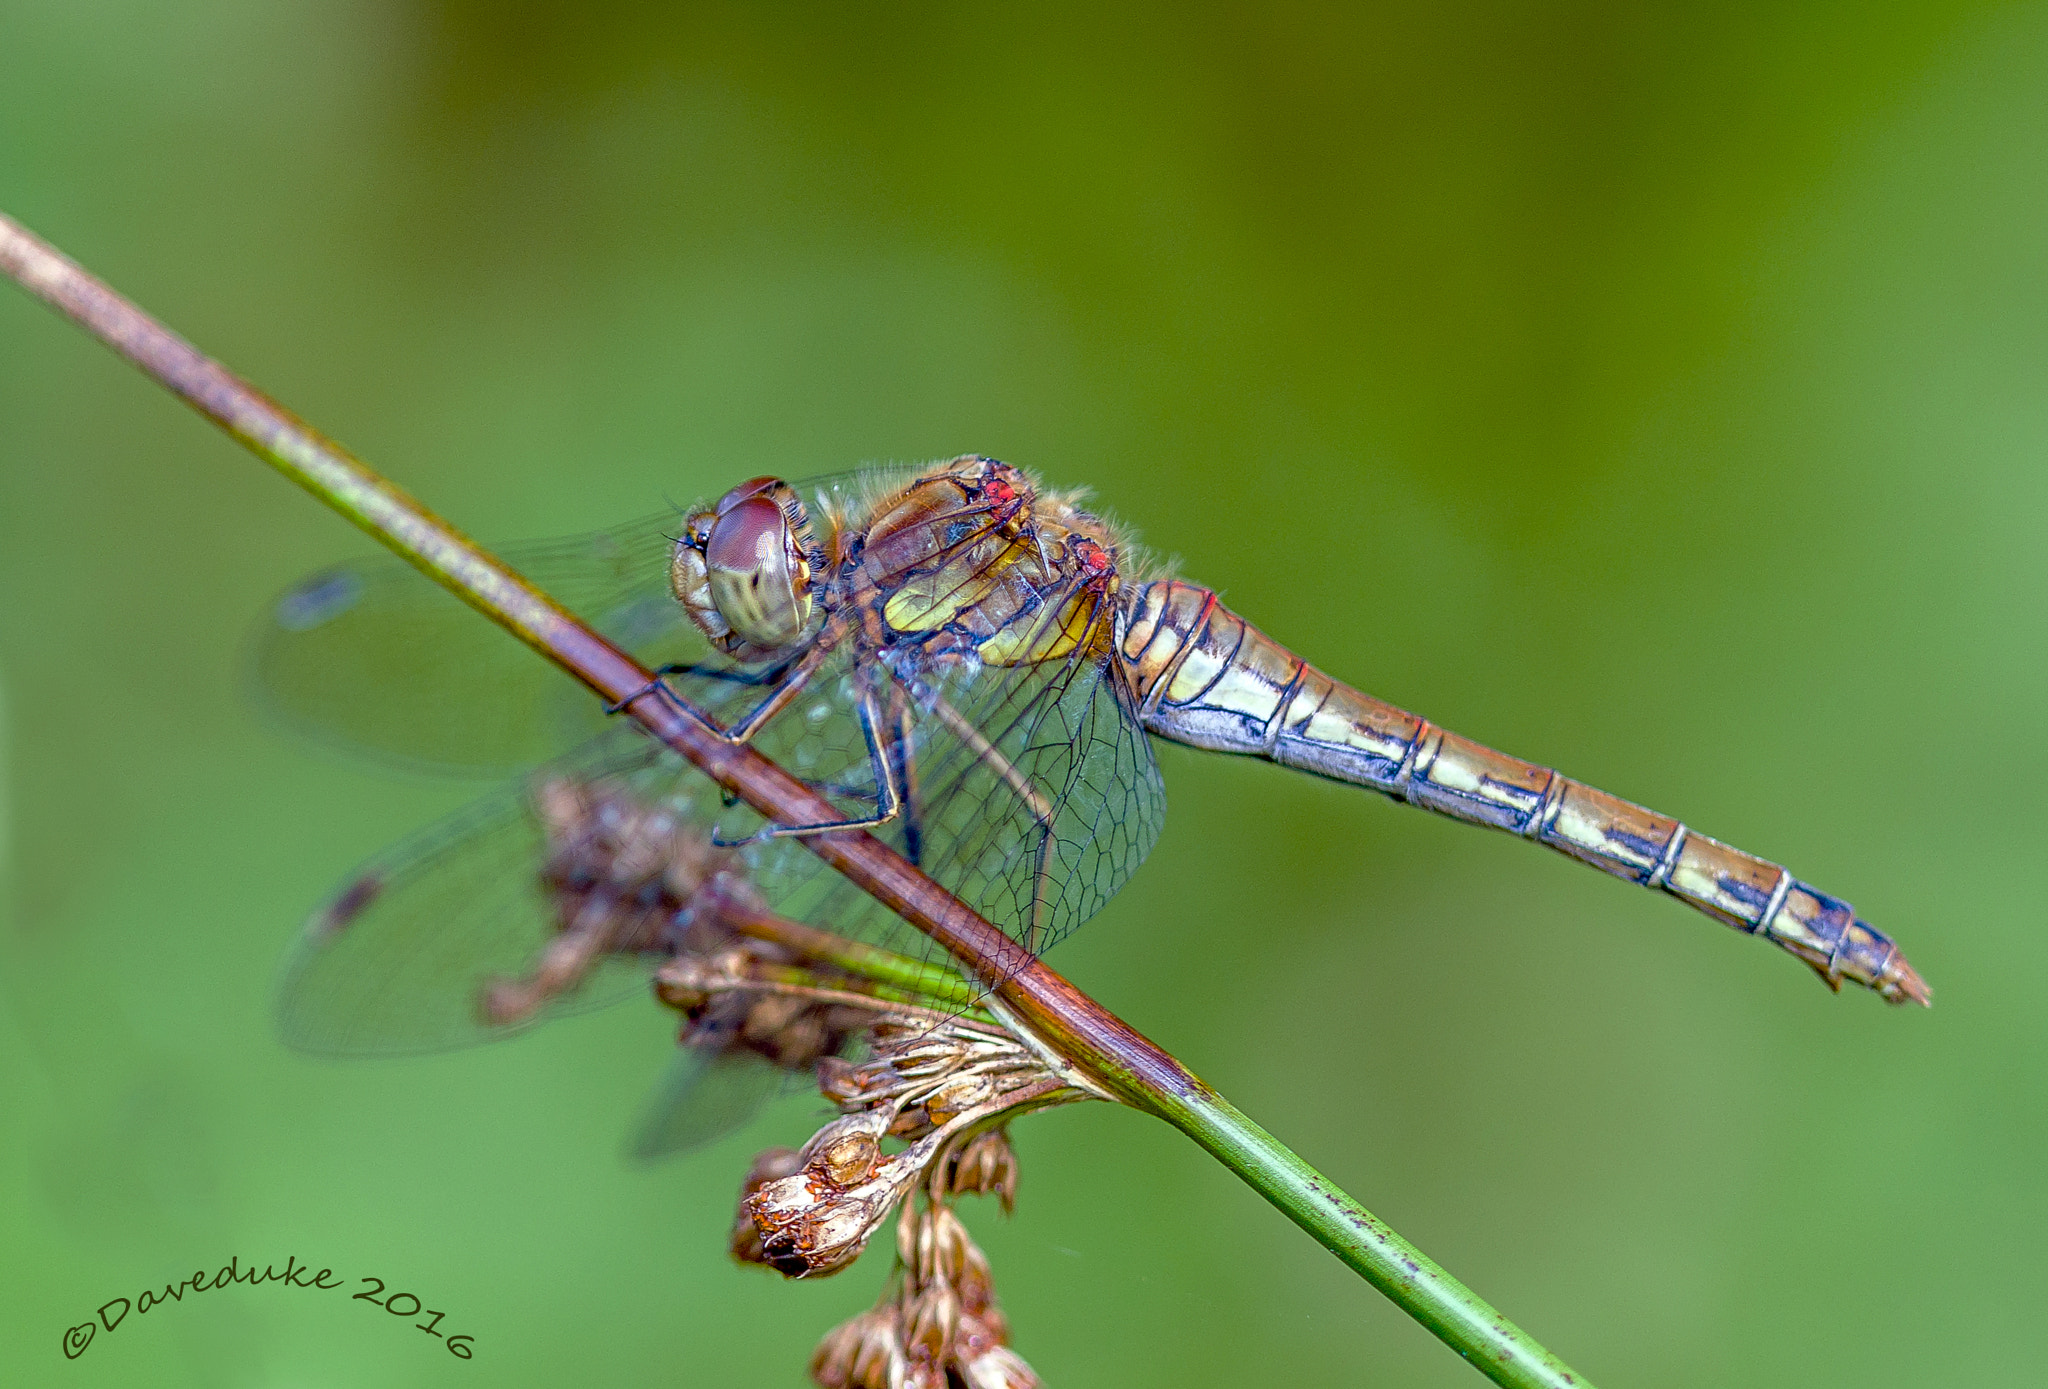 Sony a7 II + Tamron 18-270mm F3.5-6.3 Di II PZD sample photo. Dragonfly photography